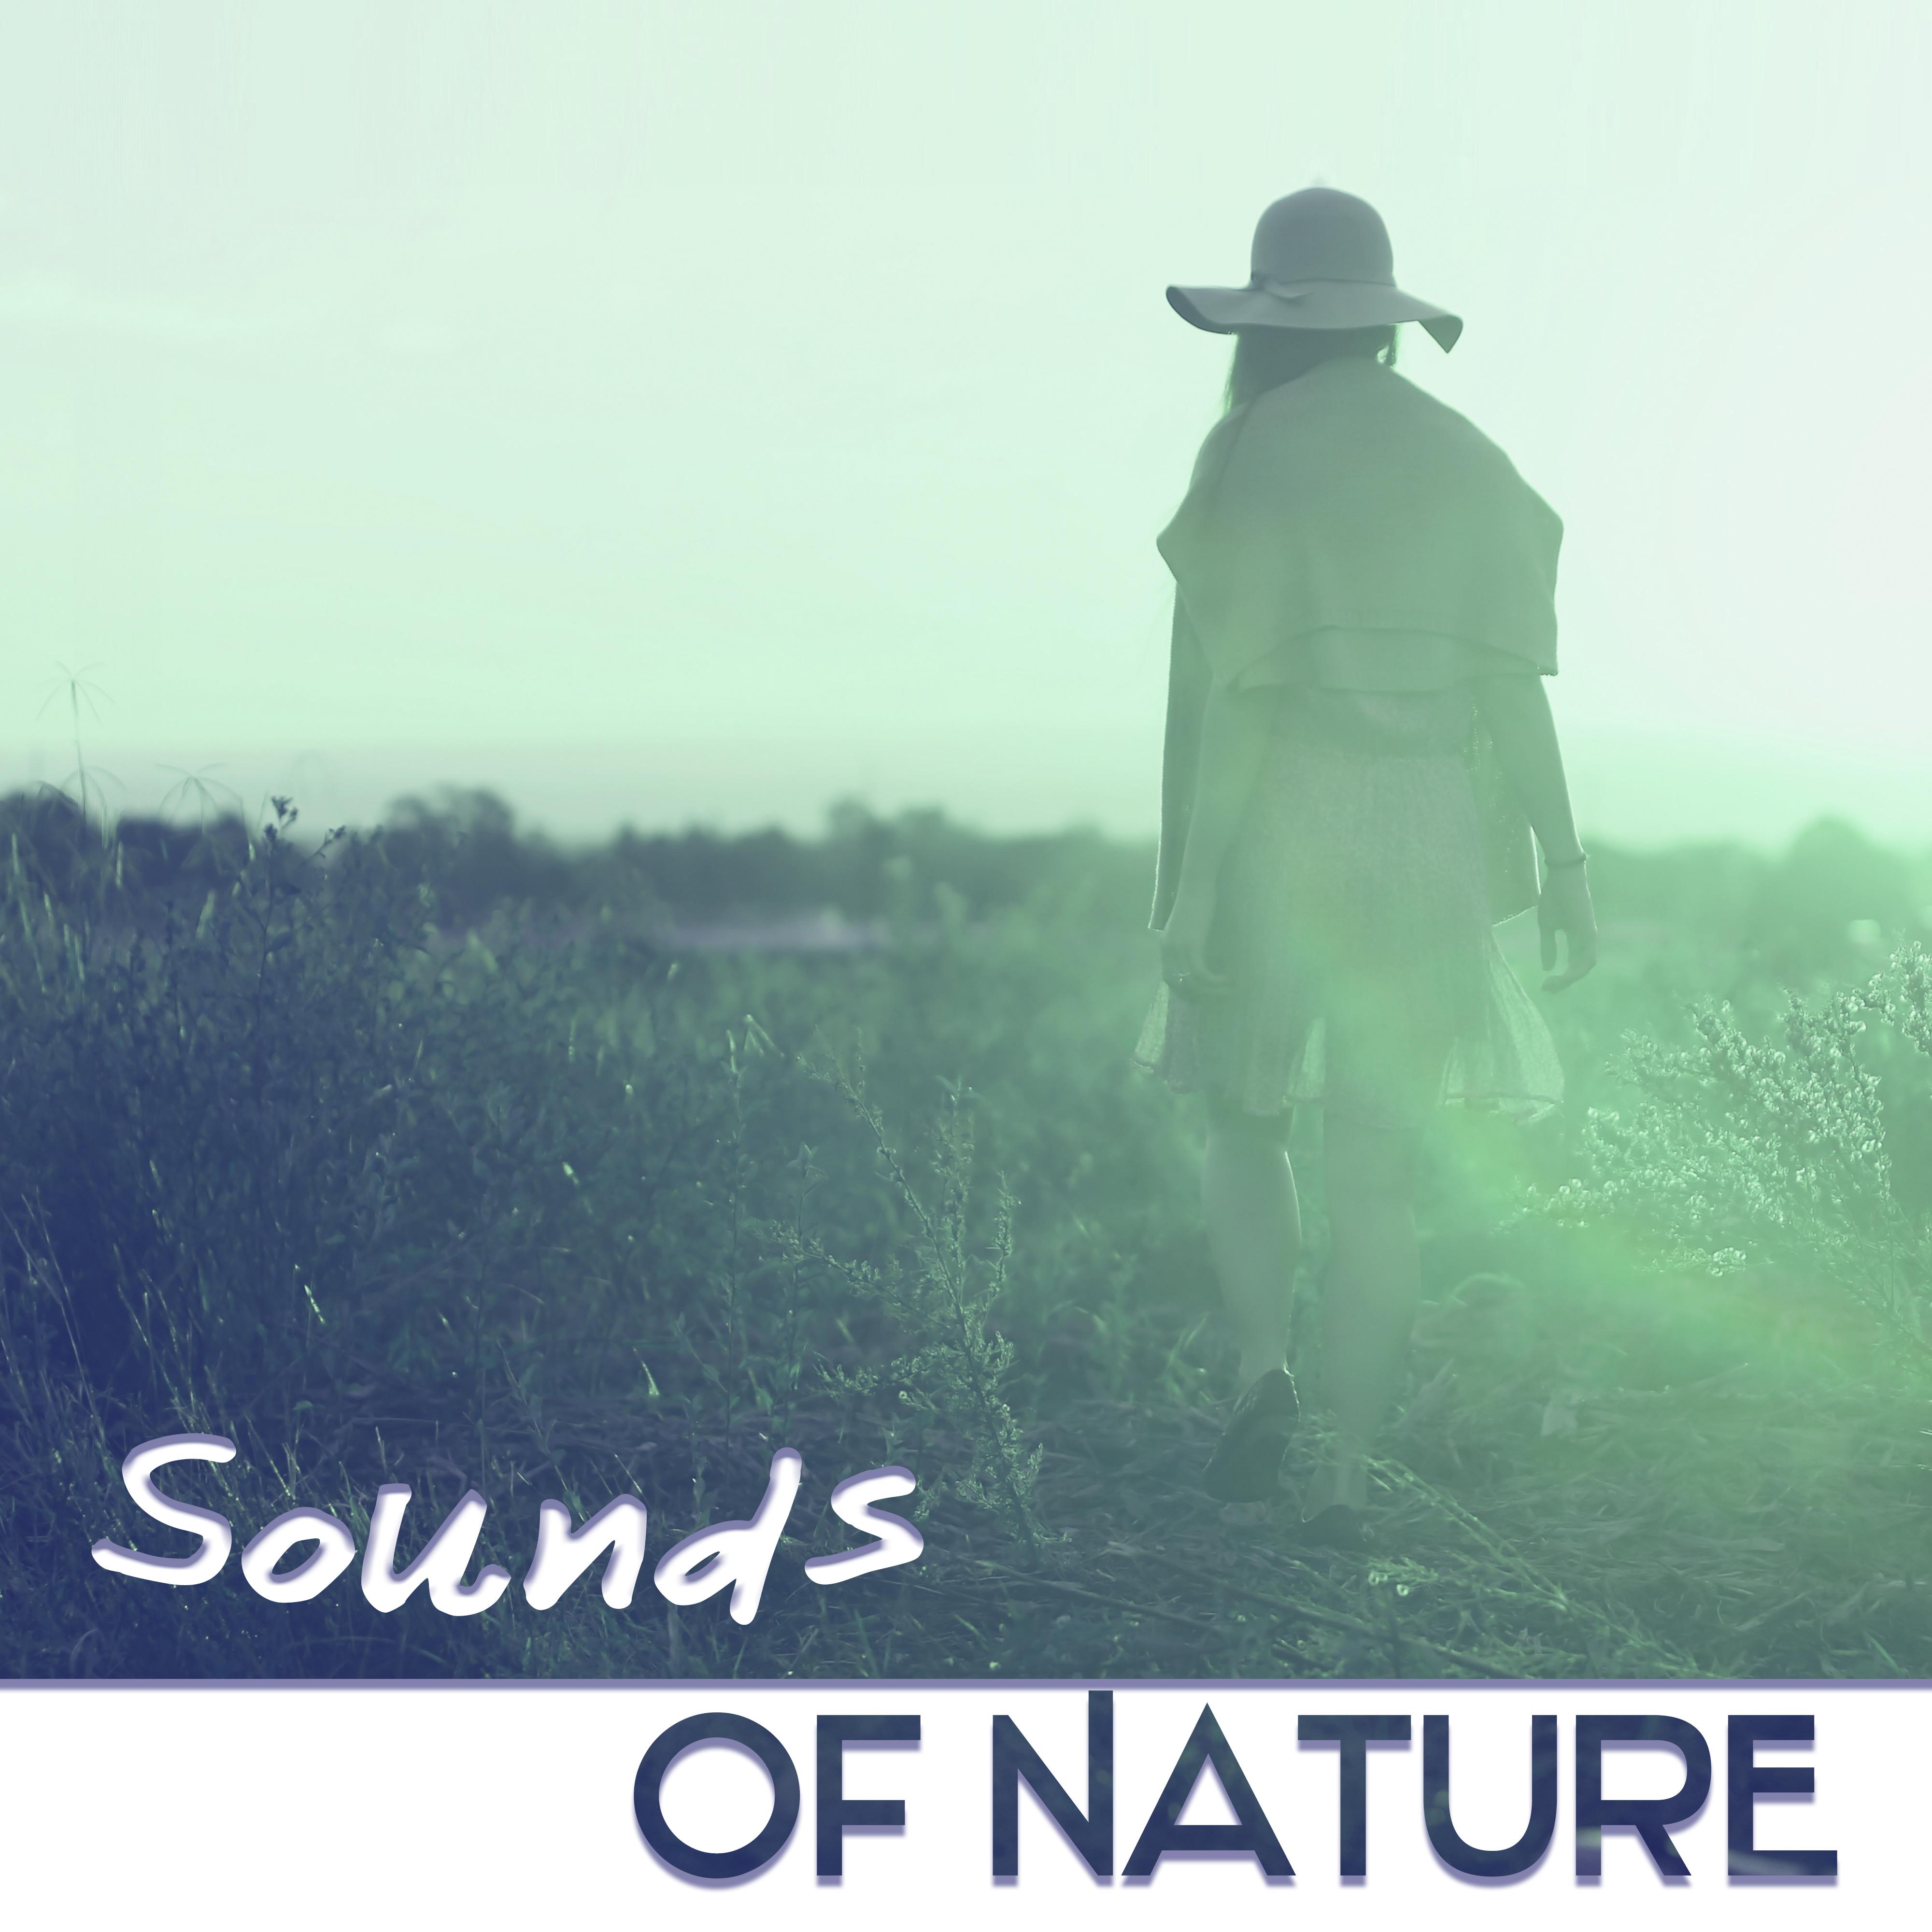 Sounds Of Nature – Music for Relaxation & Meditation, Sleep Song, Lucid Dream, Binaural Beats with Delta Waves